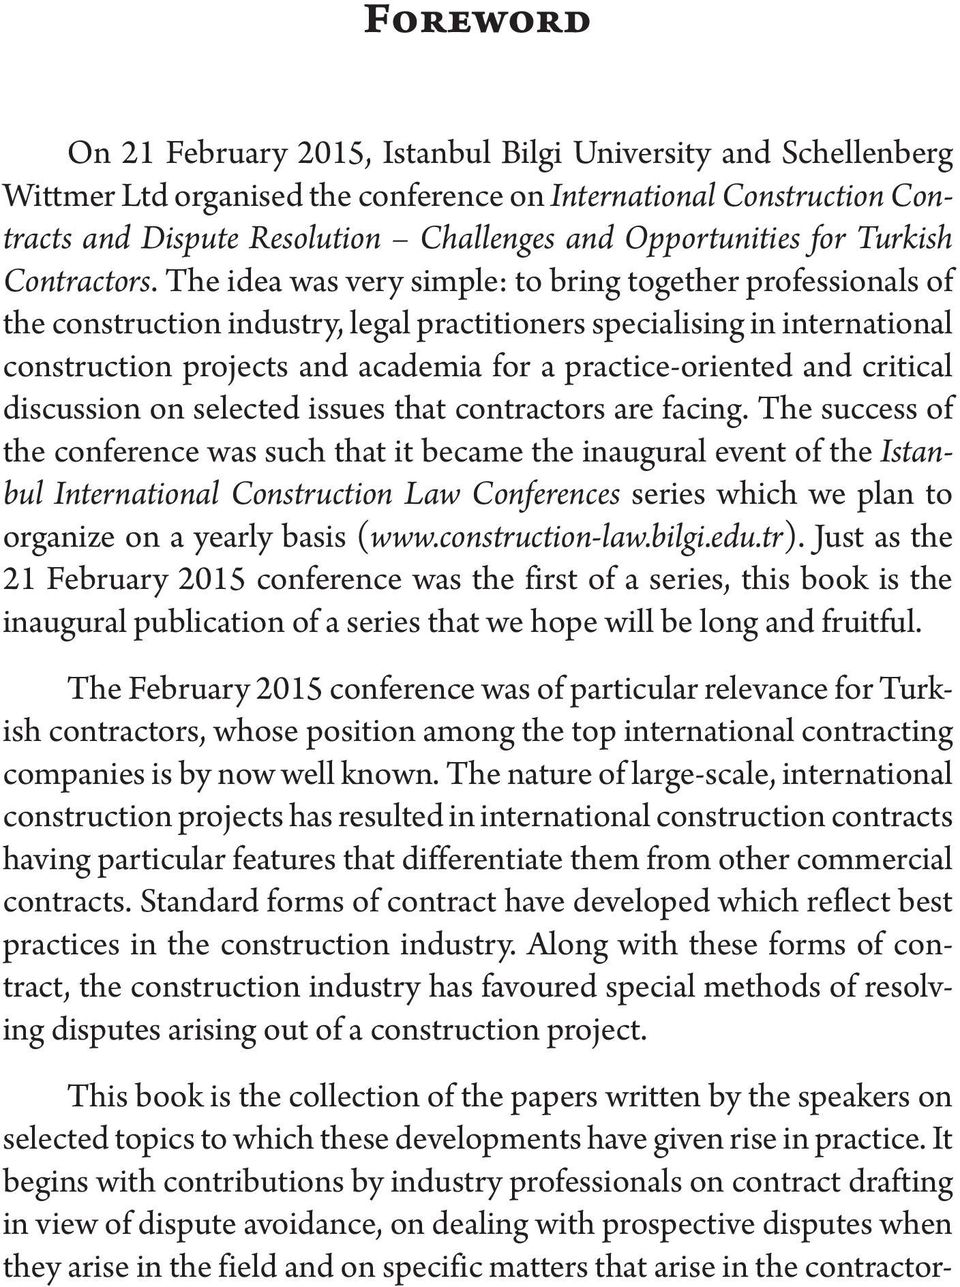 The idea was very simple: to bring together professionals of the construction industry, legal practitioners specialising in international construction projects and academia for a practice-oriented